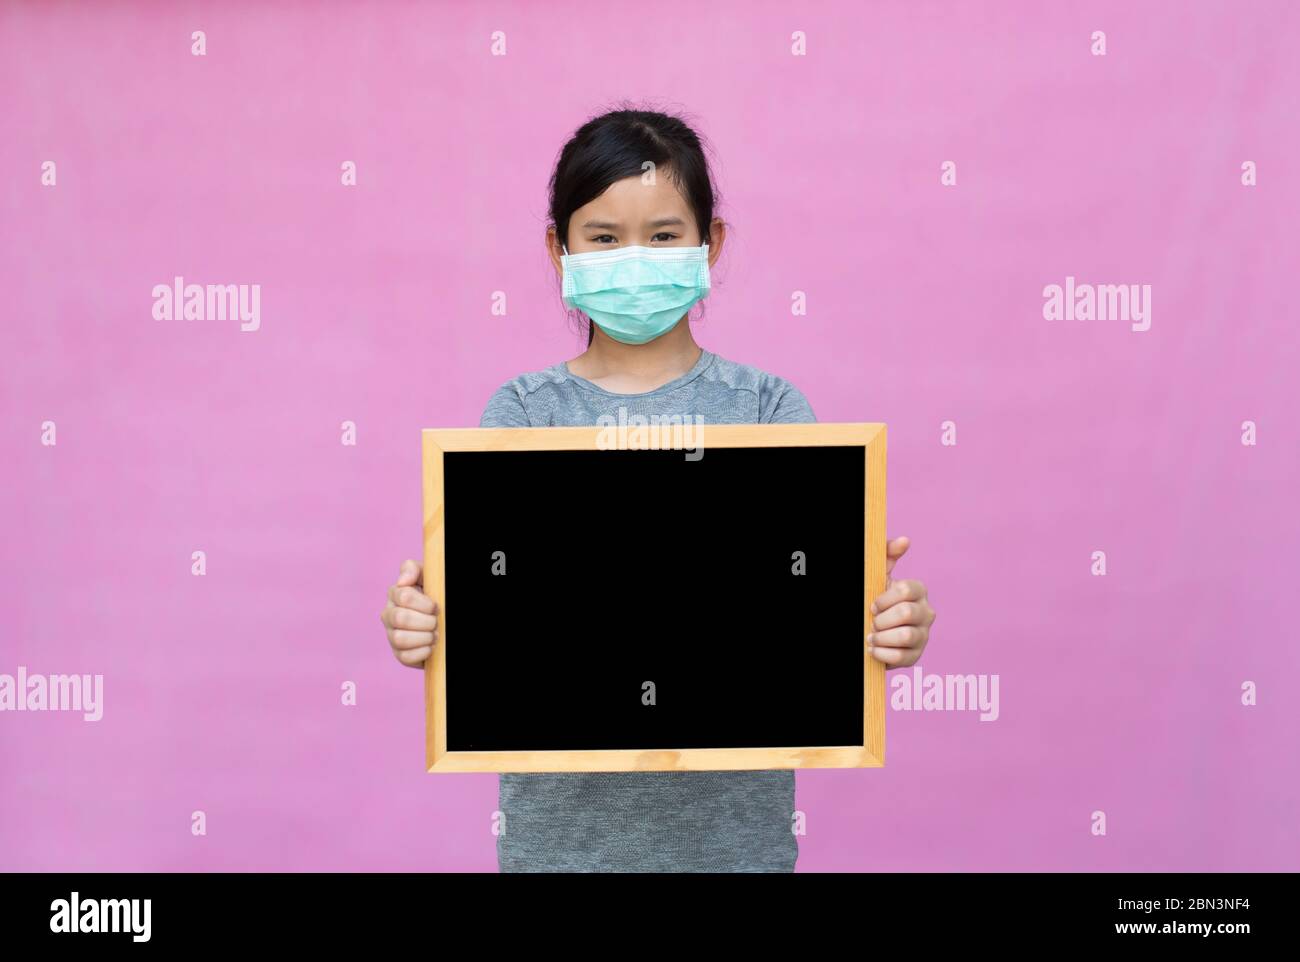 Little asian girl in a protective medical mask holding black board isolated on pink background. Protect from Coronavirus or Covid-19 epidemic. Stock Photo